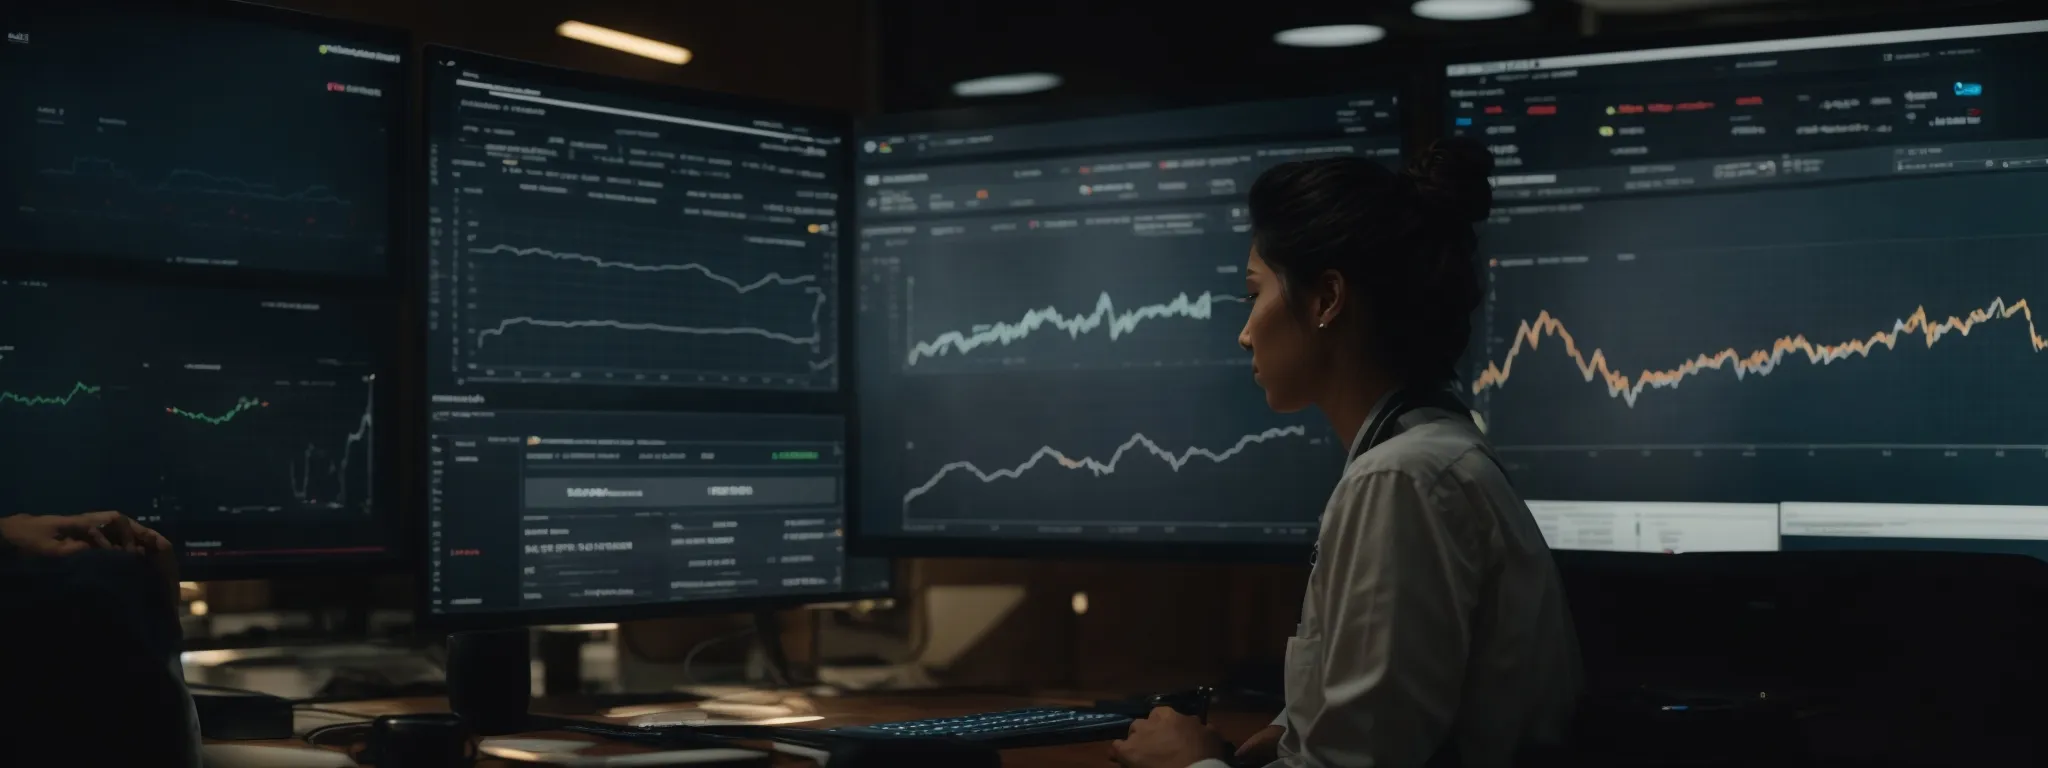 a person engaging with an intuitive dashboard on a computer screen, showcasing graphs and data analytics highlighting keyword trends.